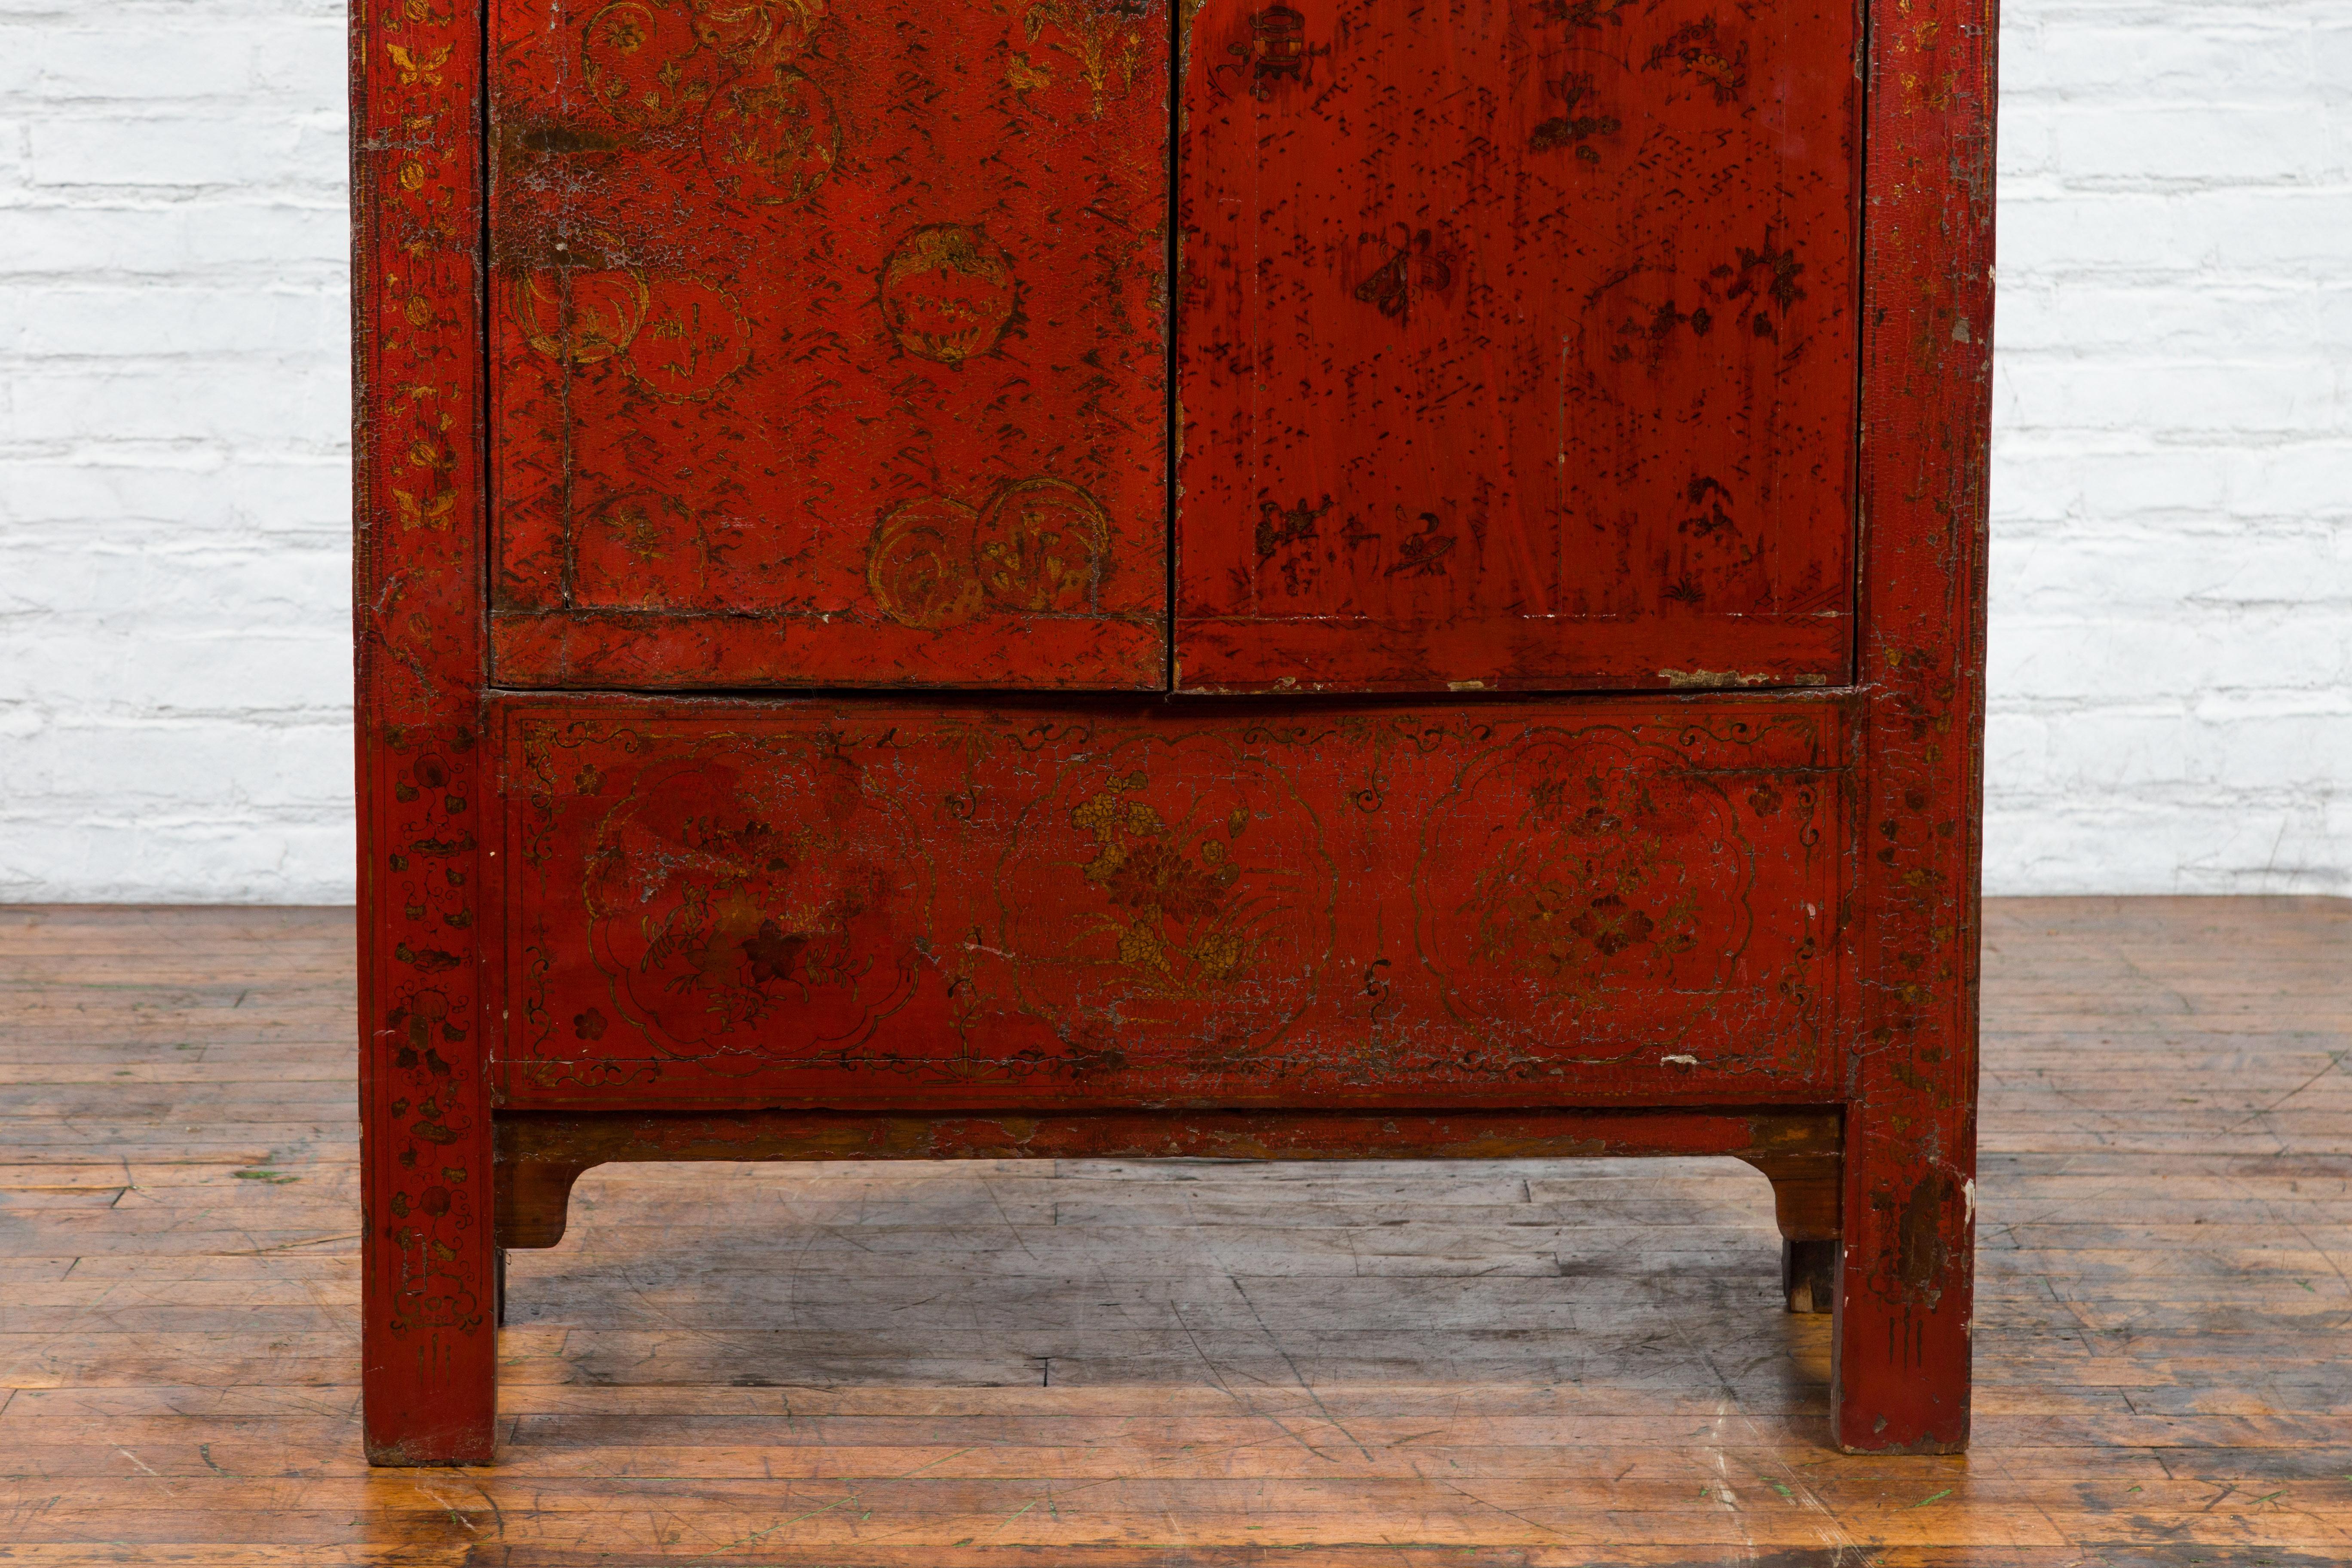 Lacquered Qing Dynasty Period 19th Century Red Lacquer Shanxi Cabinet with Floral Décor For Sale